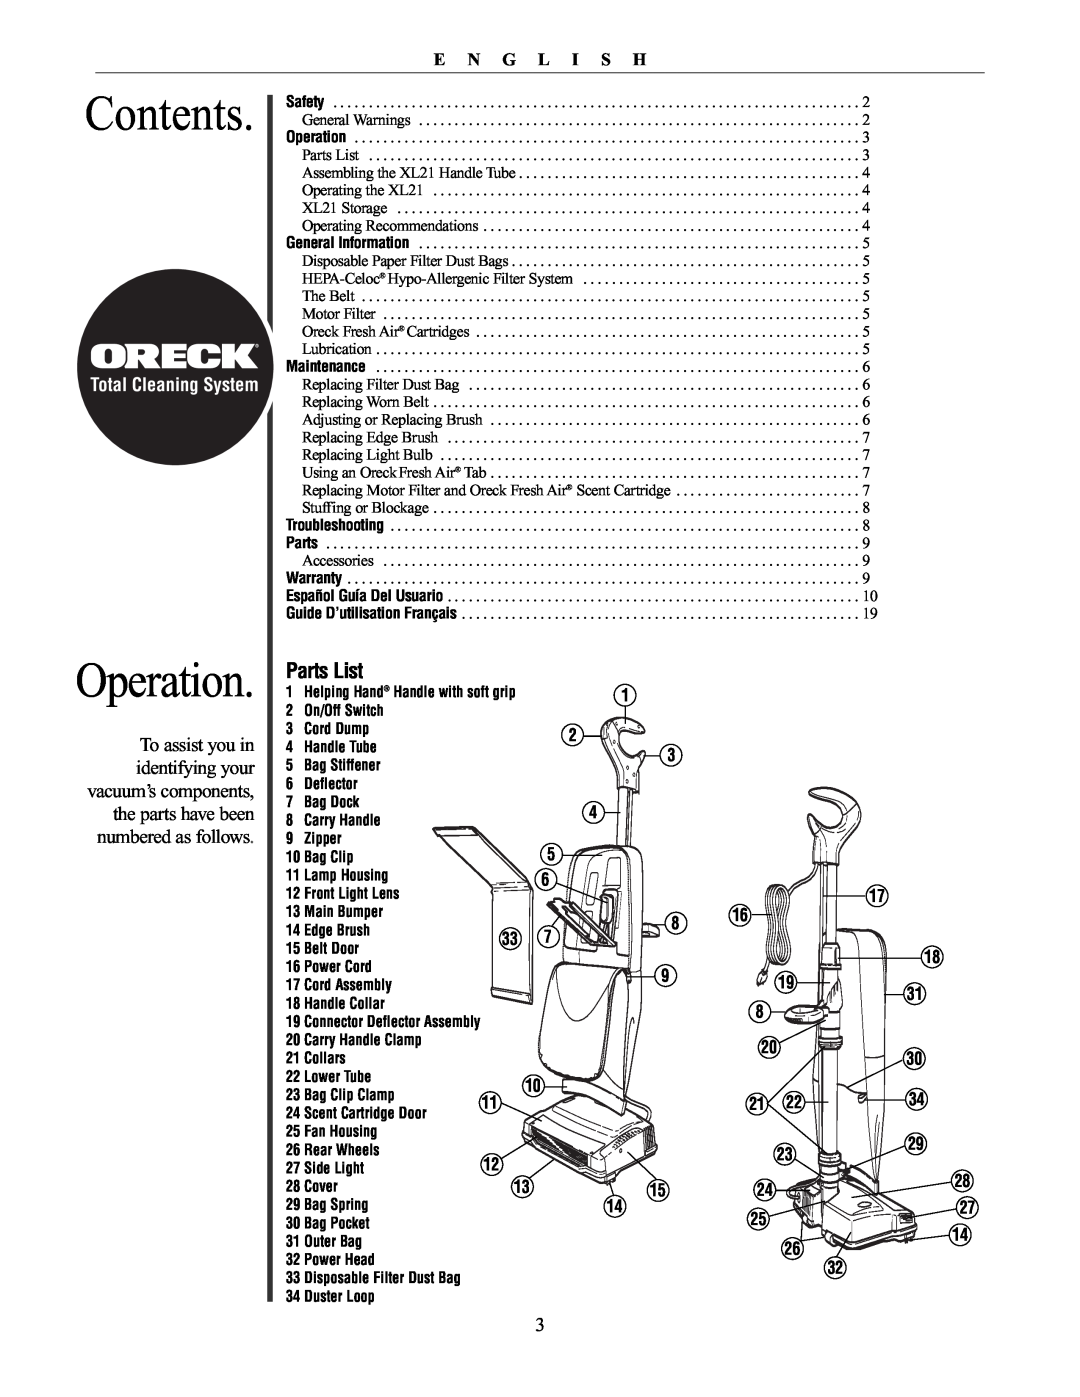 Oreck XL21 manual Contents, Operation, Parts List, E N G L I S H, Total Cleaning System 